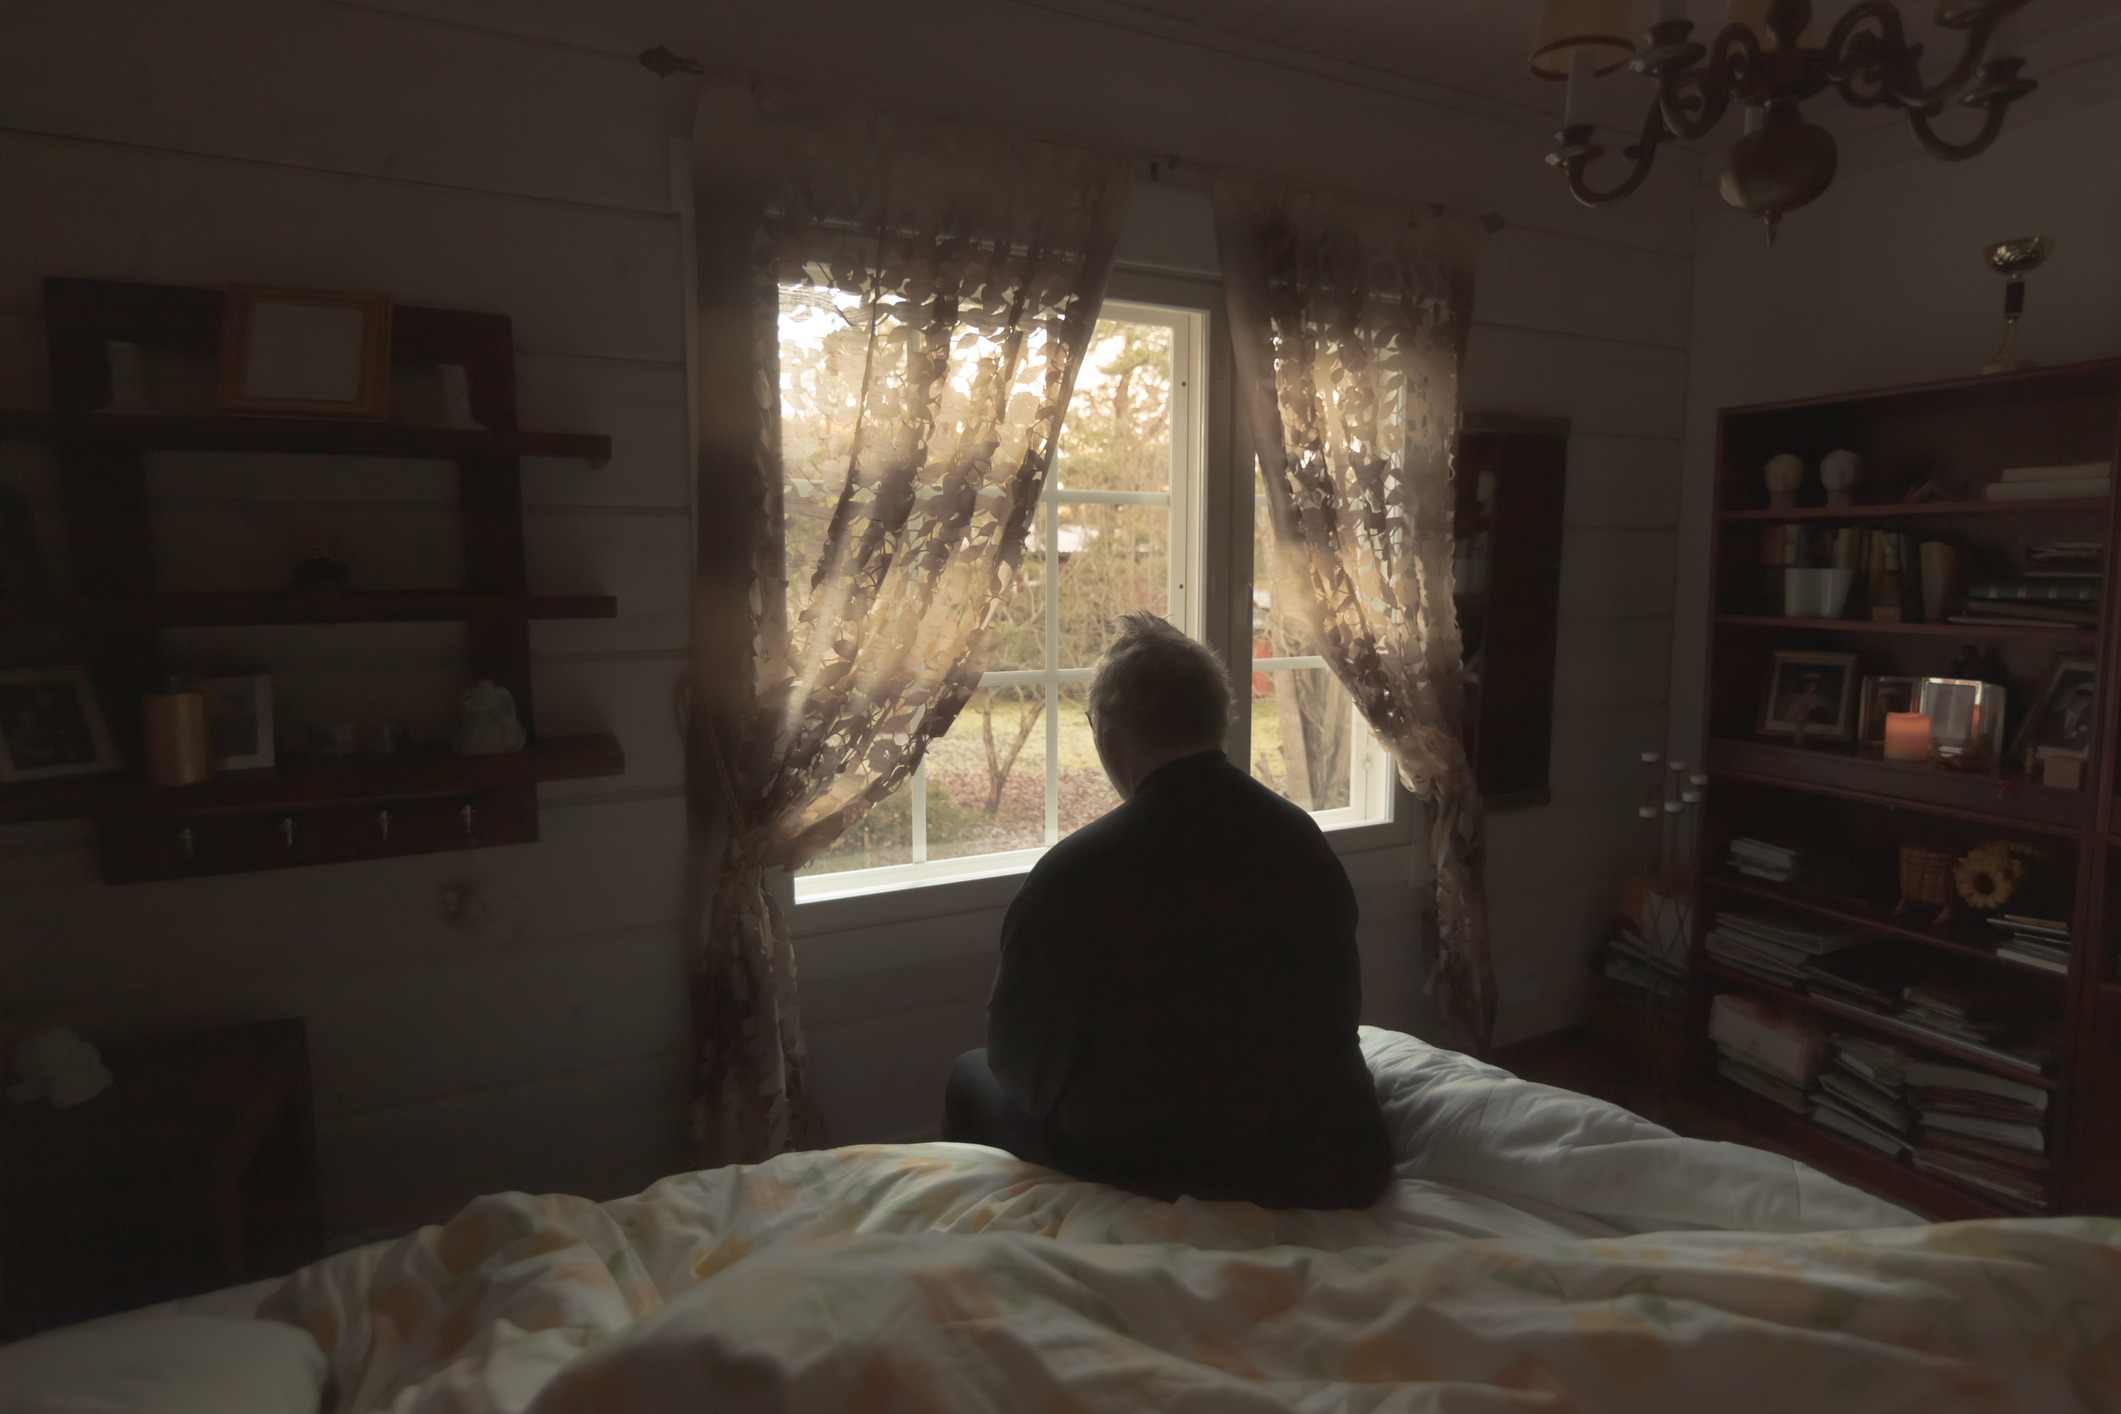 Person sitting on a bed looking out of a window in a room with sheer curtains and a chandelier